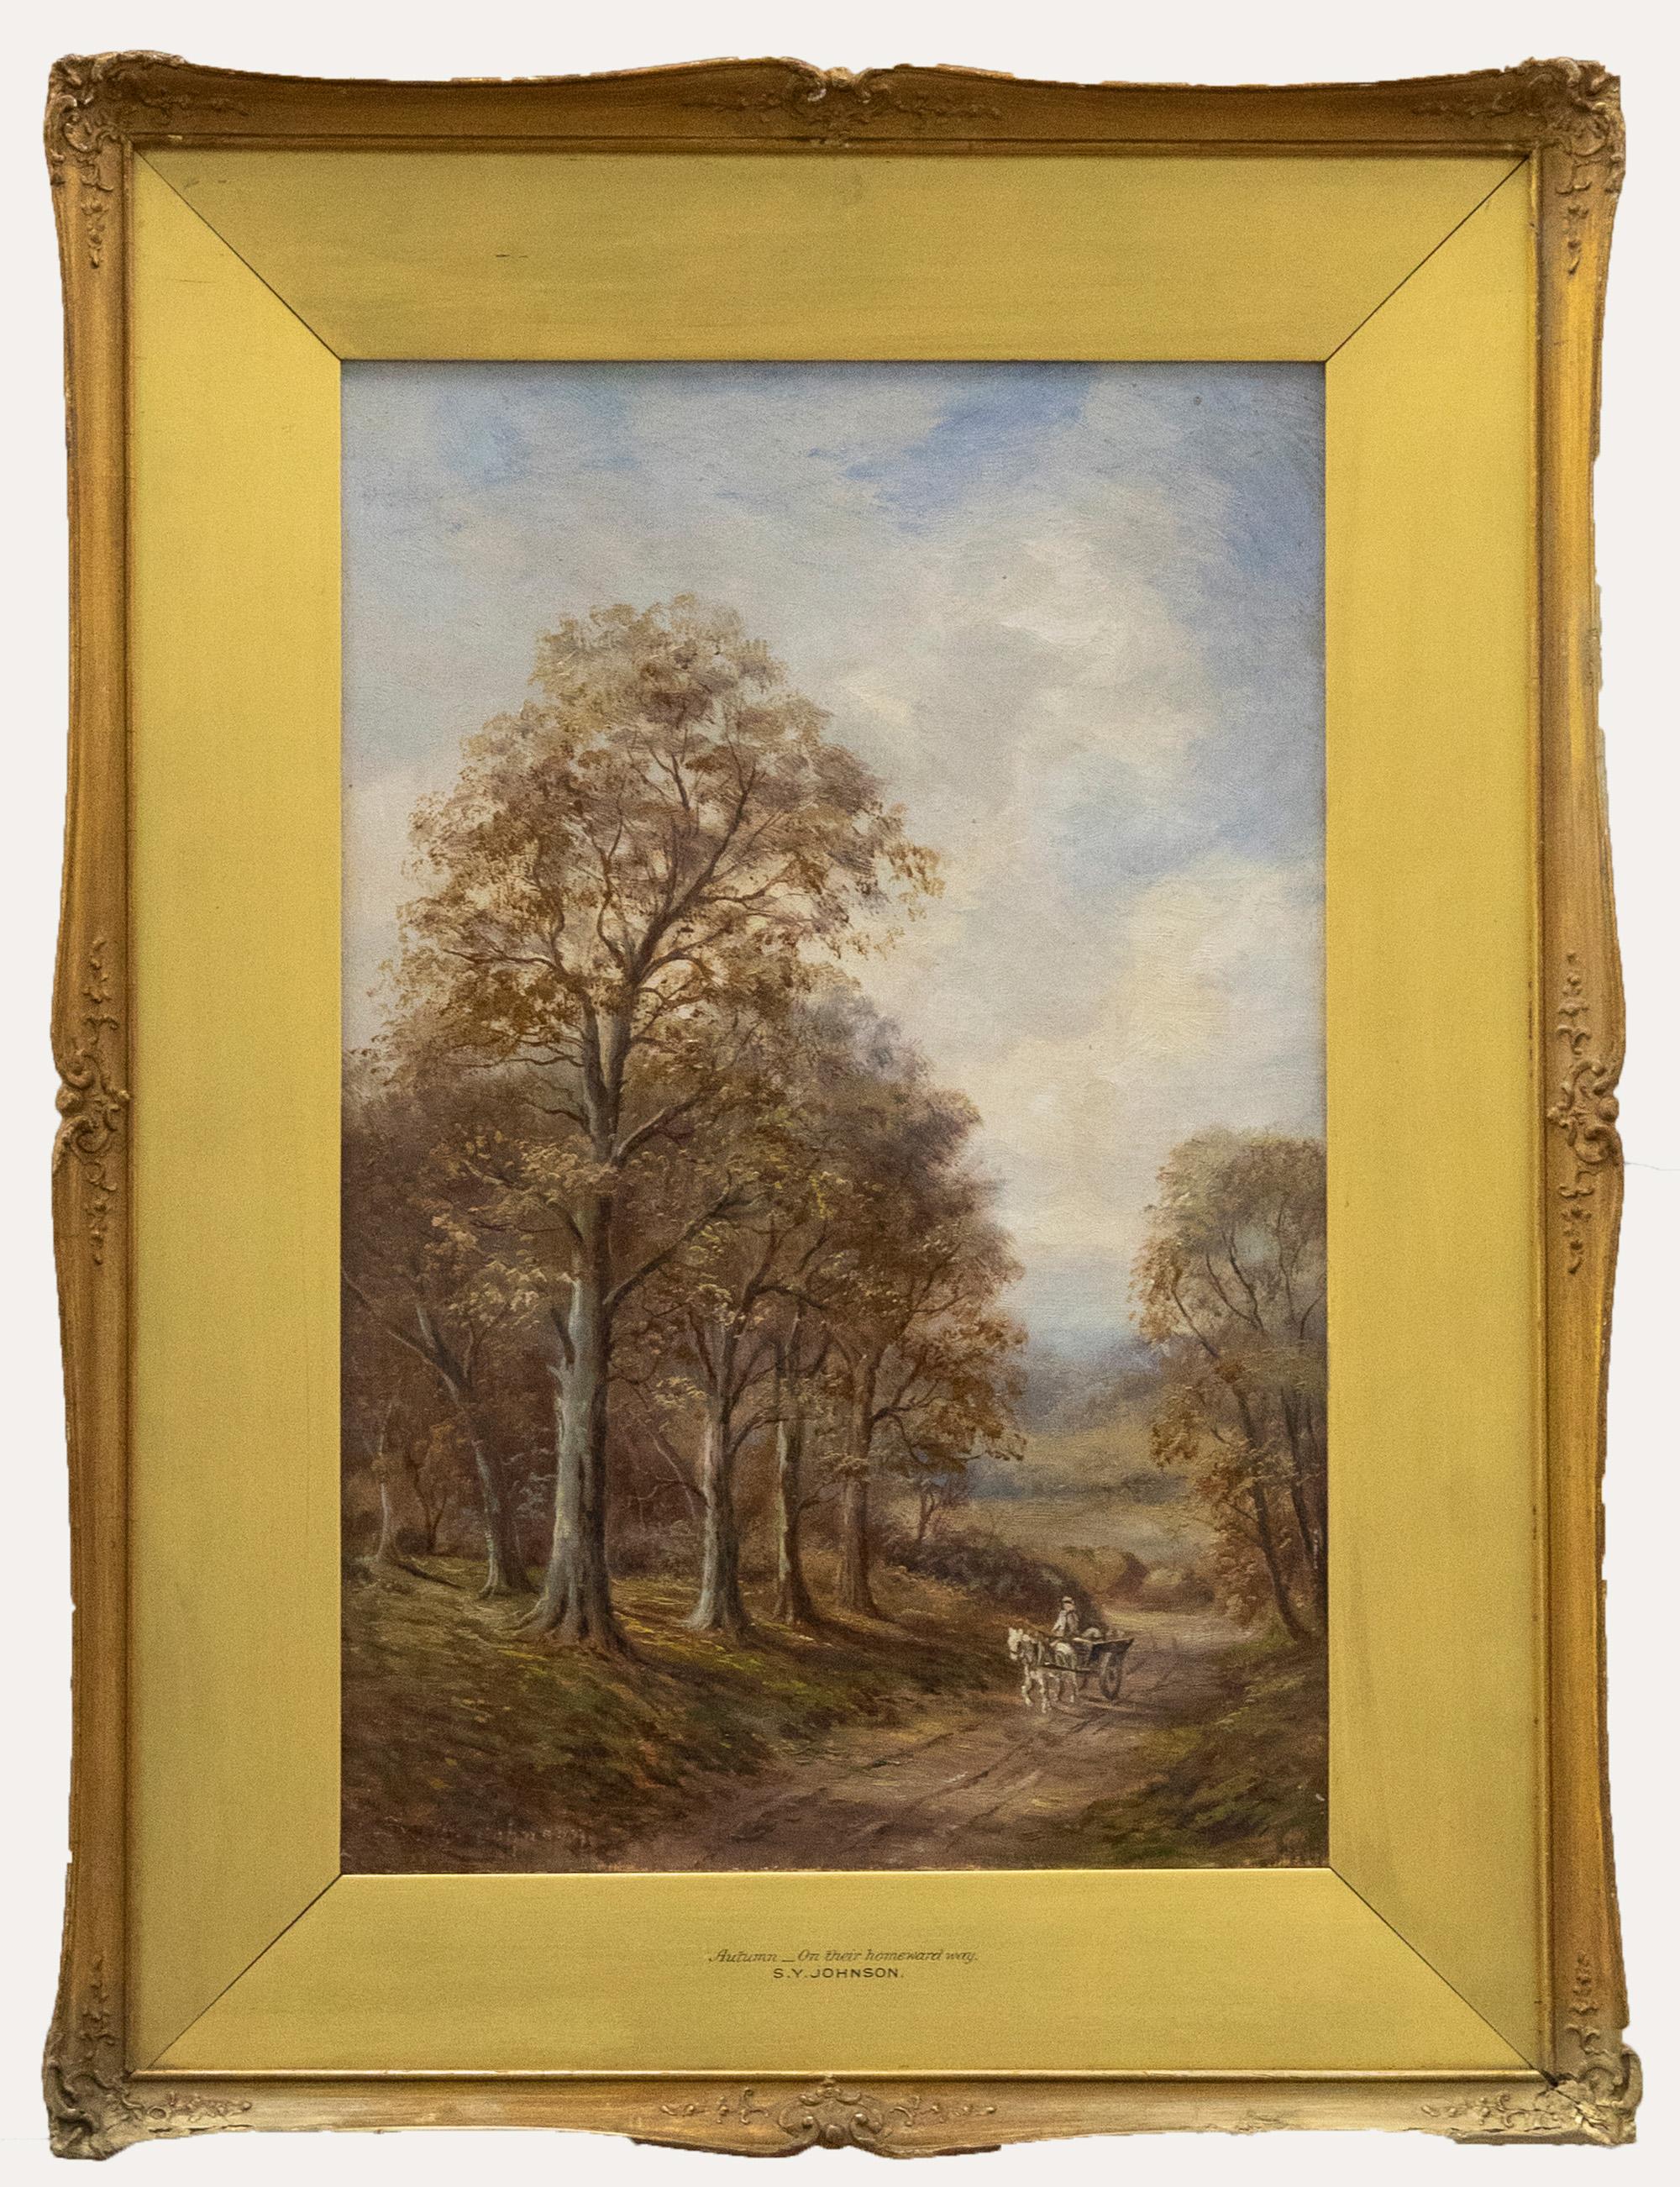 A stunning late 19th/early 20th century oil painting by the highly collected English School painter Sidney Yates Johnson. This excellent example of the artist's oeuvre depicts a figure on his homeward way, riding his horse and cart through an